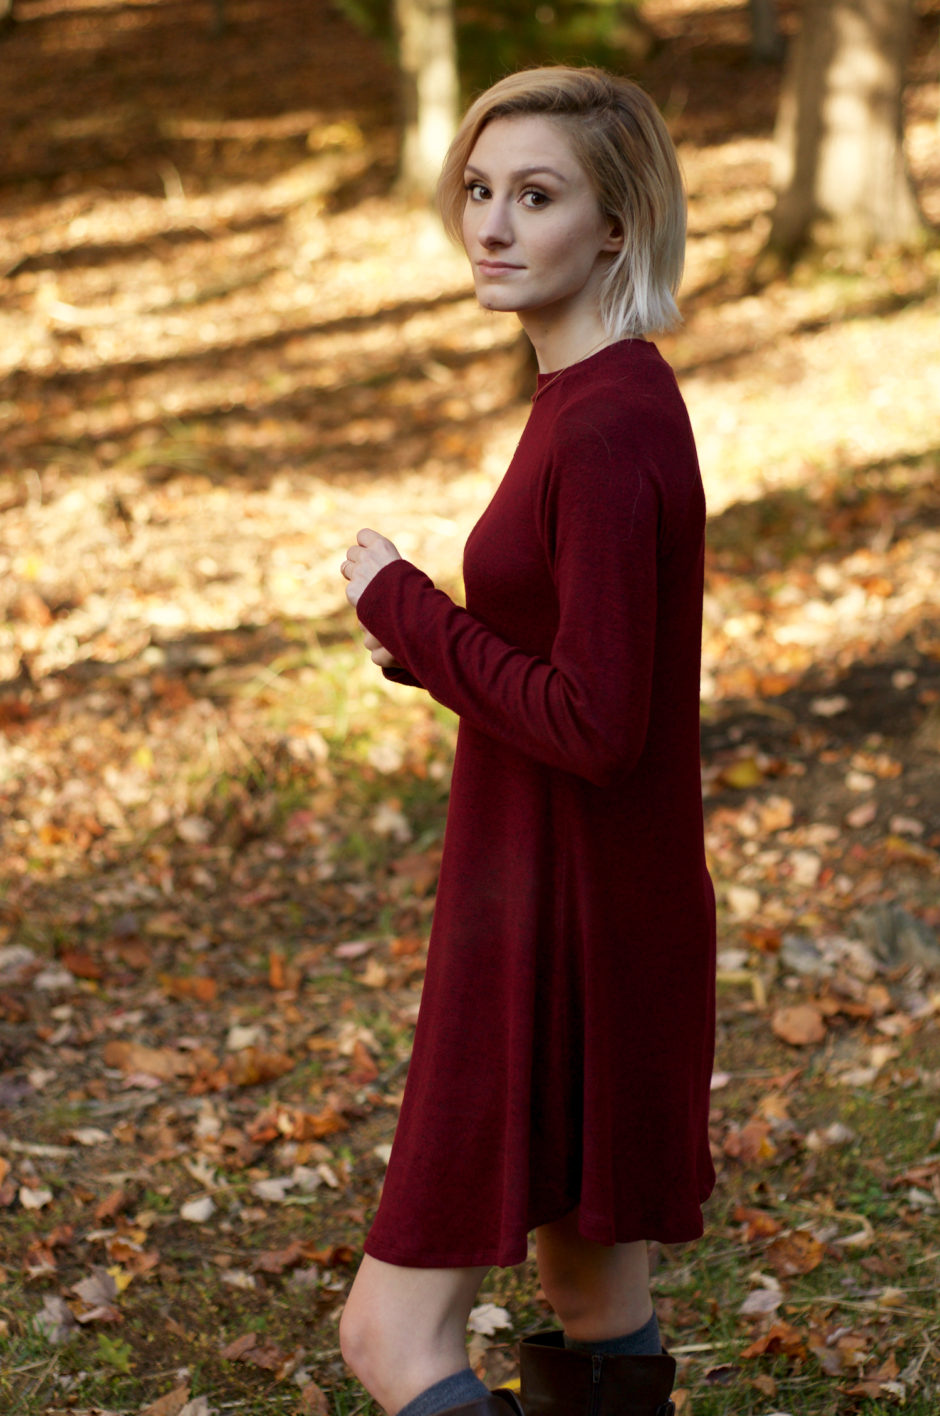 Maroon Dress Perfect For Fall! Cozy Fall Fashion Inspiration.